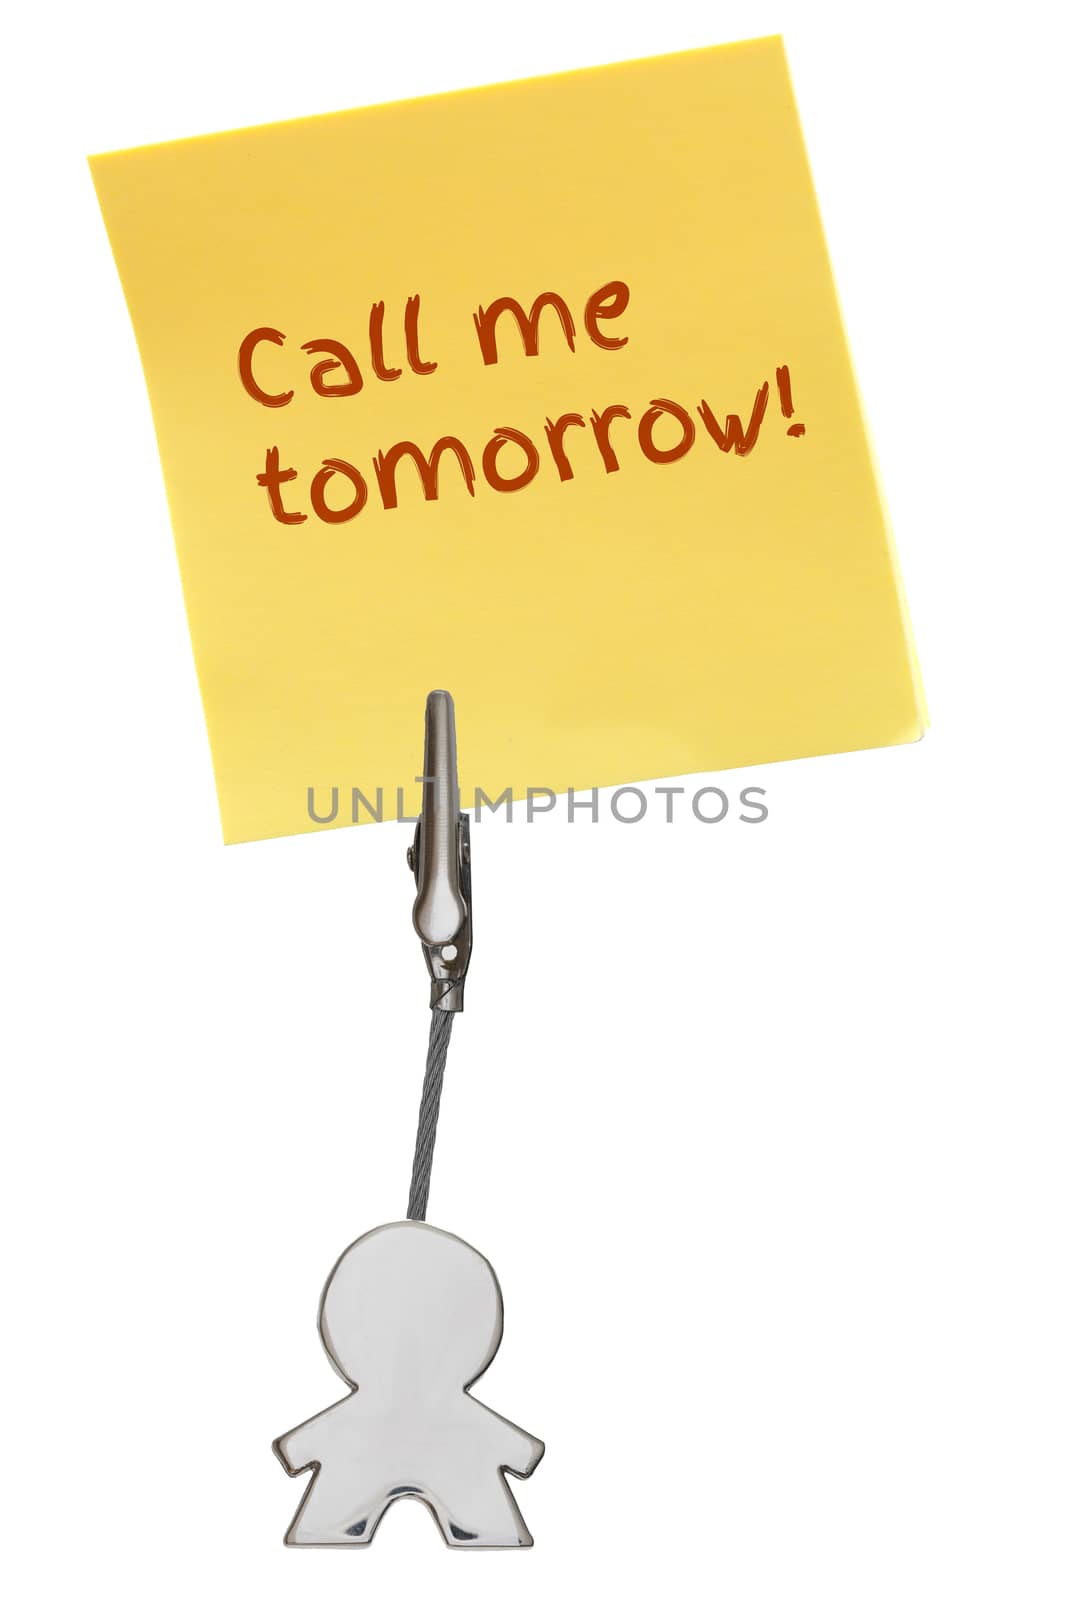 Man Figure Business Card Holder with clip holding a yellow paper note Call me tomorrow; isolated on white background, customizable